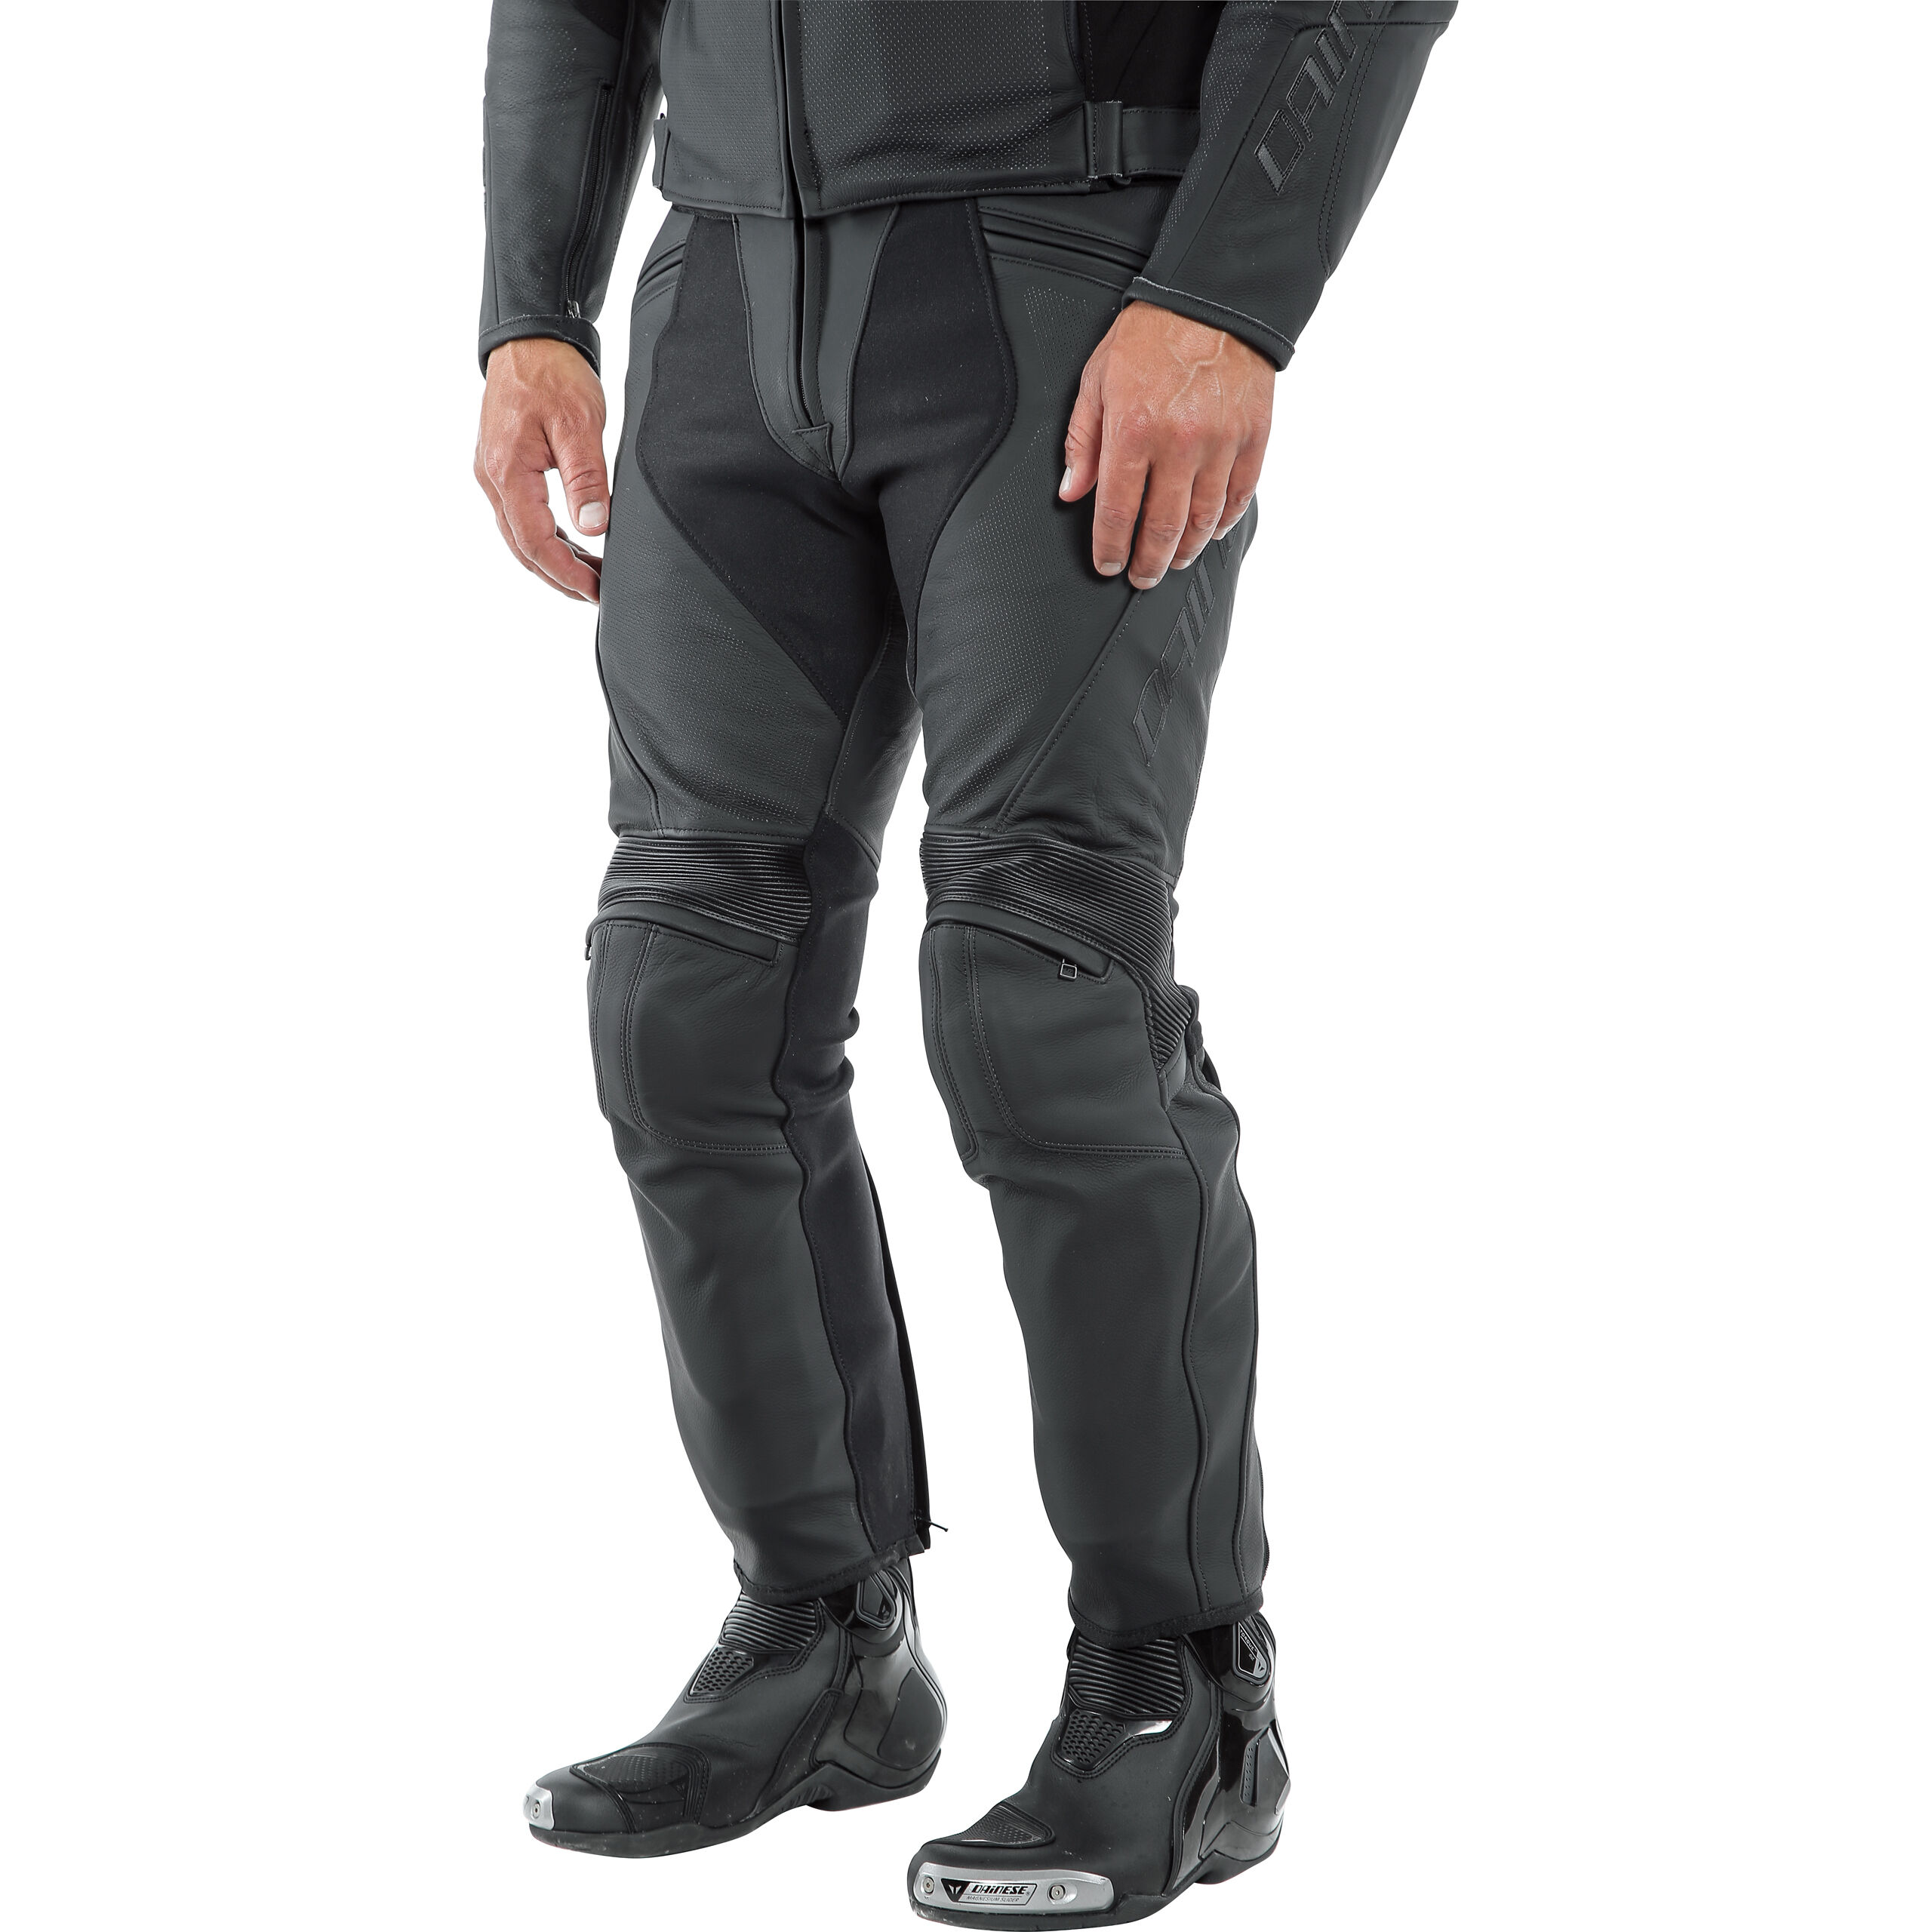 Leather Trousers Dainese | Motorcycle Trousers | Bike Stop UK